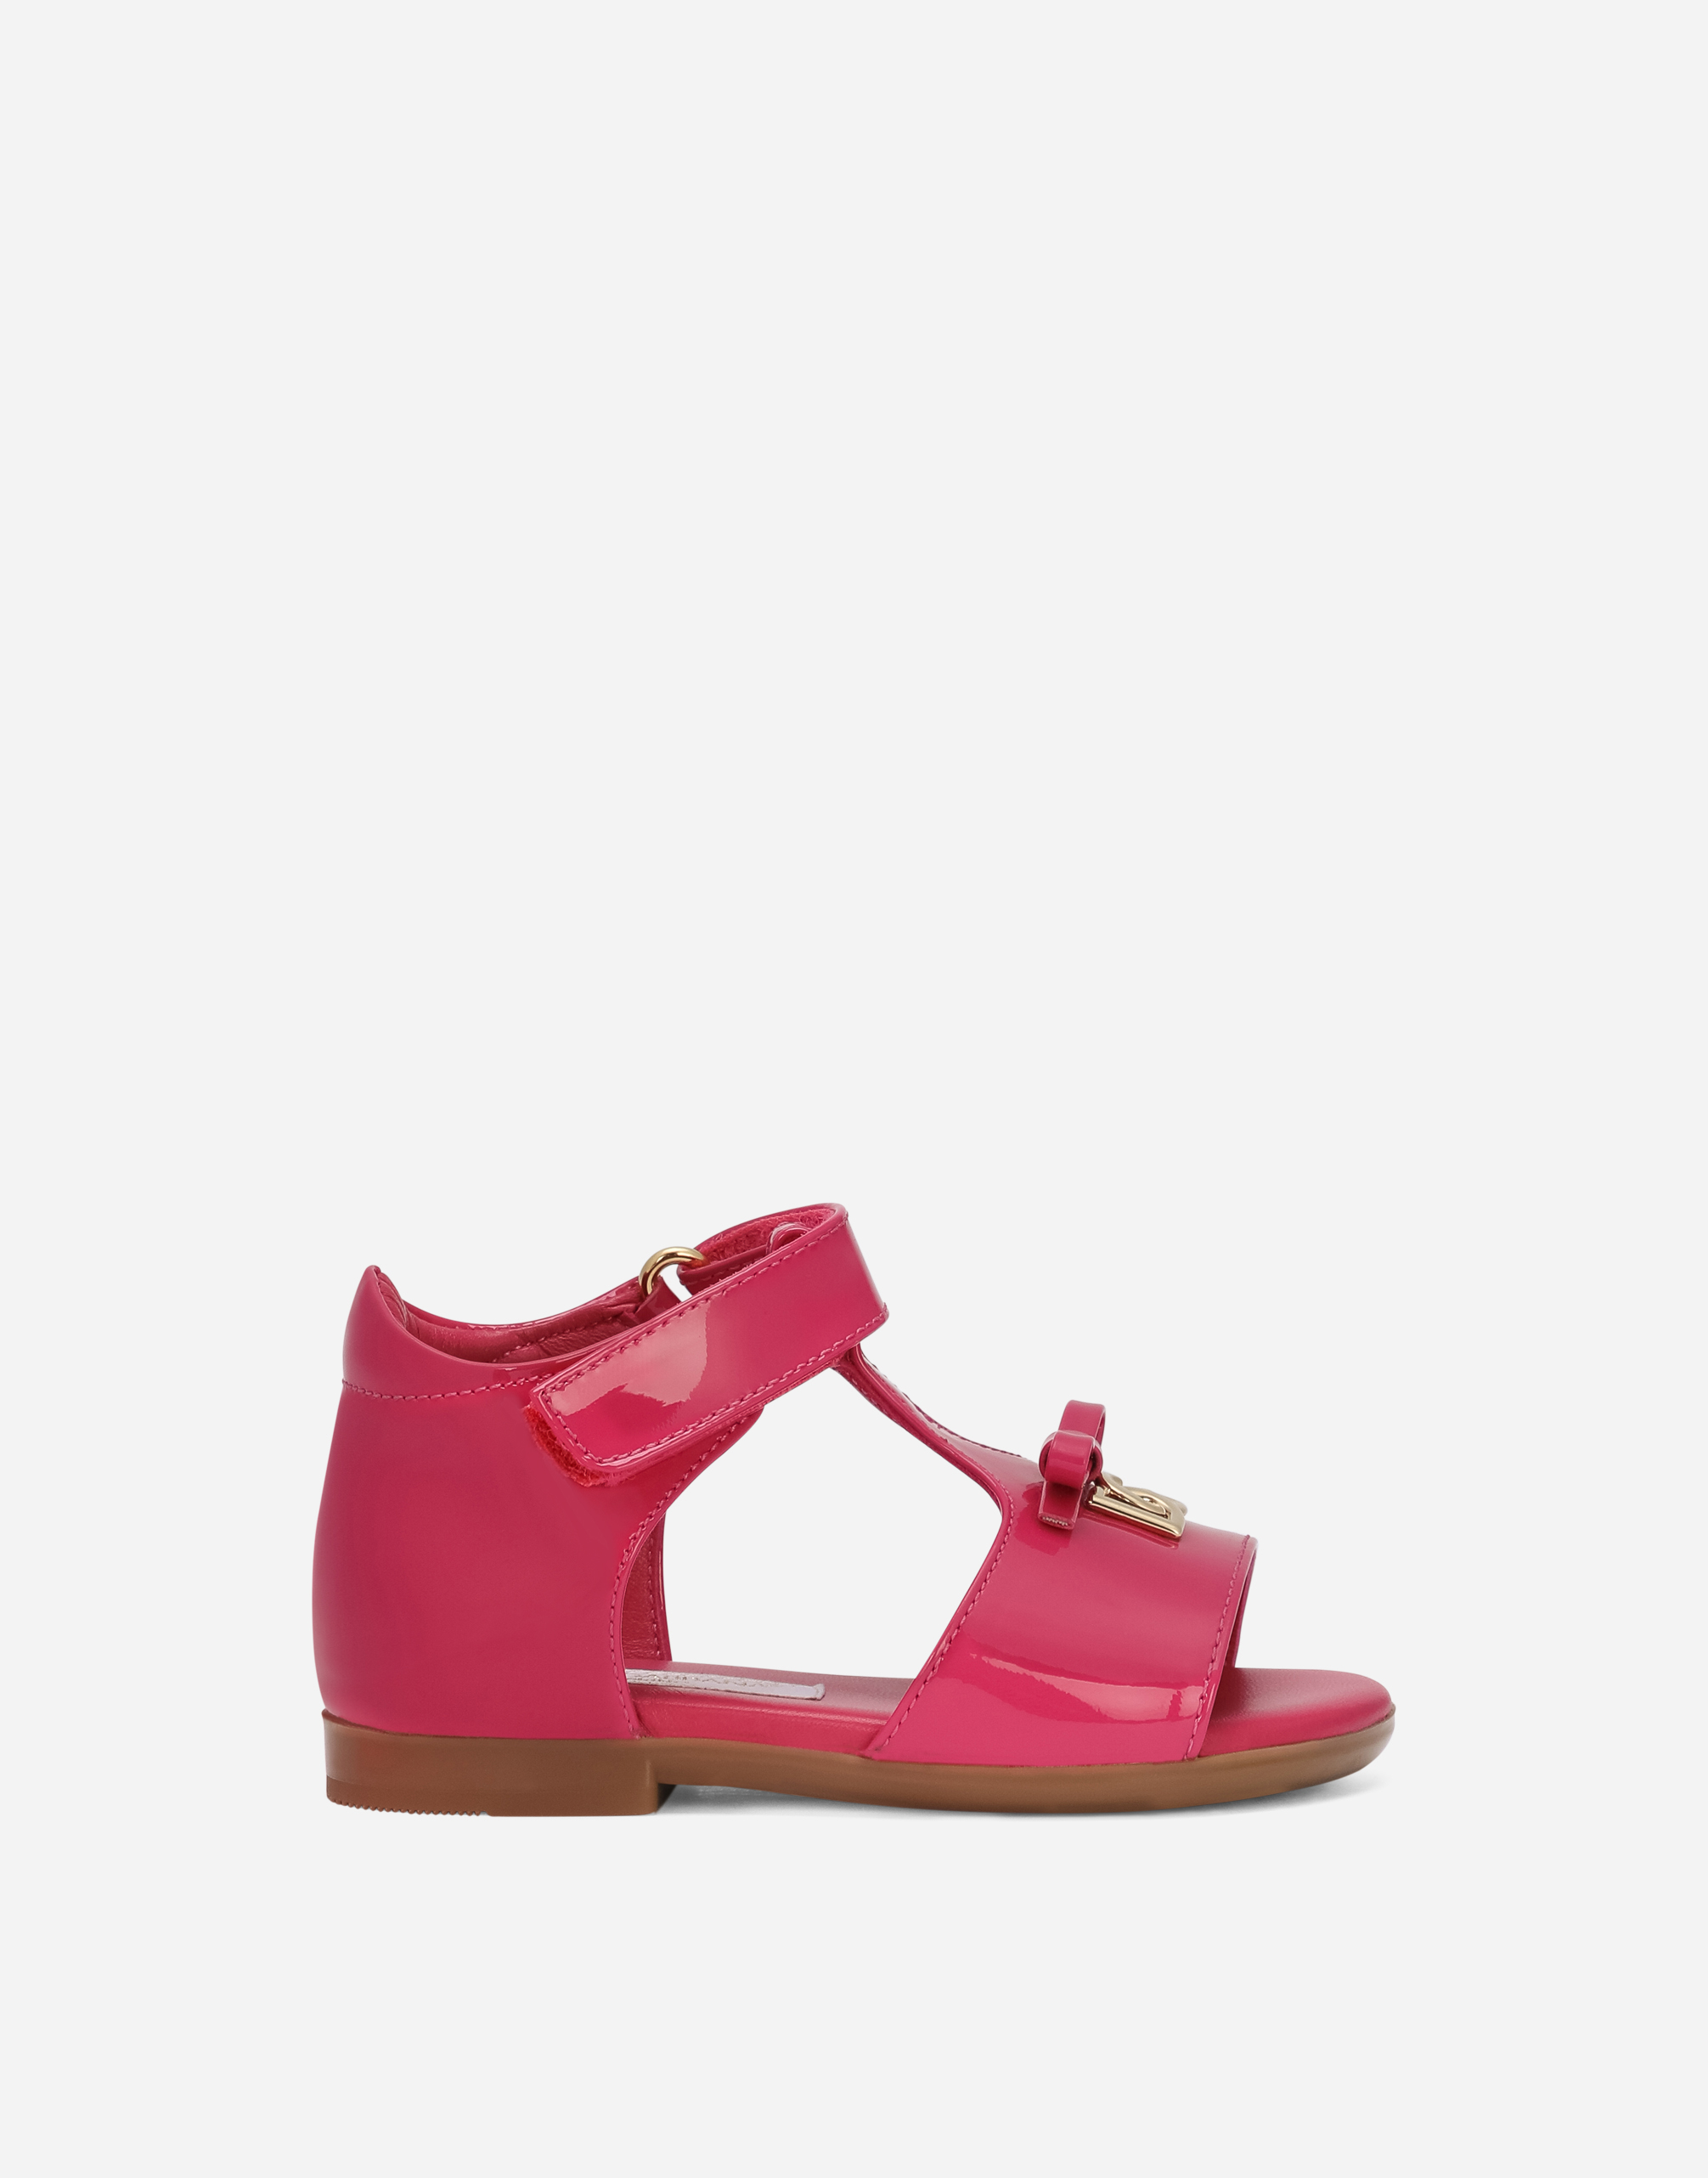 Patent leather first steps sandals with metal DG logo in Pink